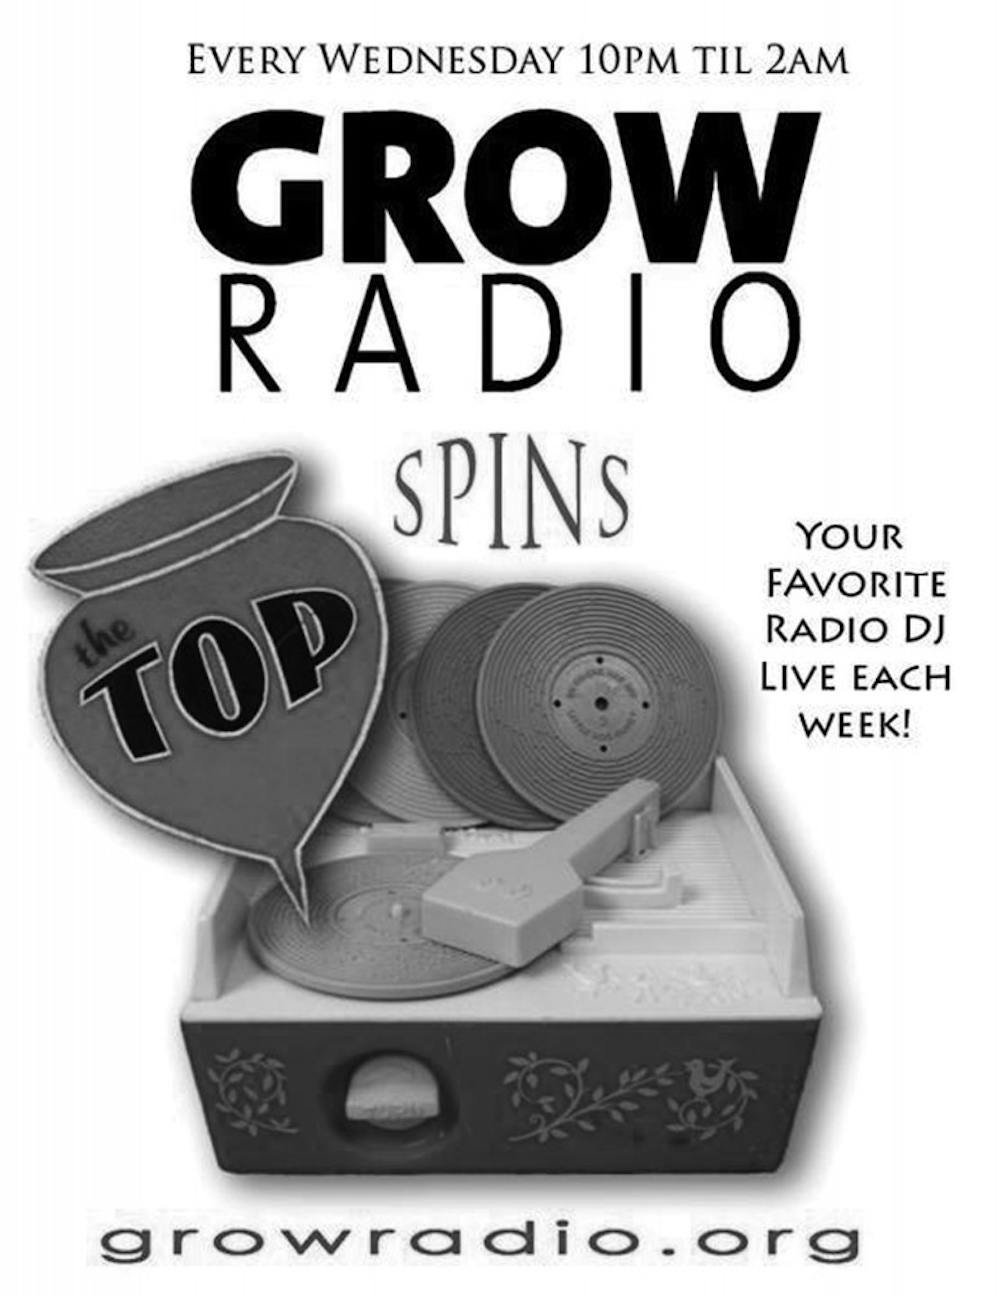 <p>Disc Jockeys from local, nonprofit, internet radio station, Grow radio, will be playing music for patrons at The Top on Wednesday nights.</p>